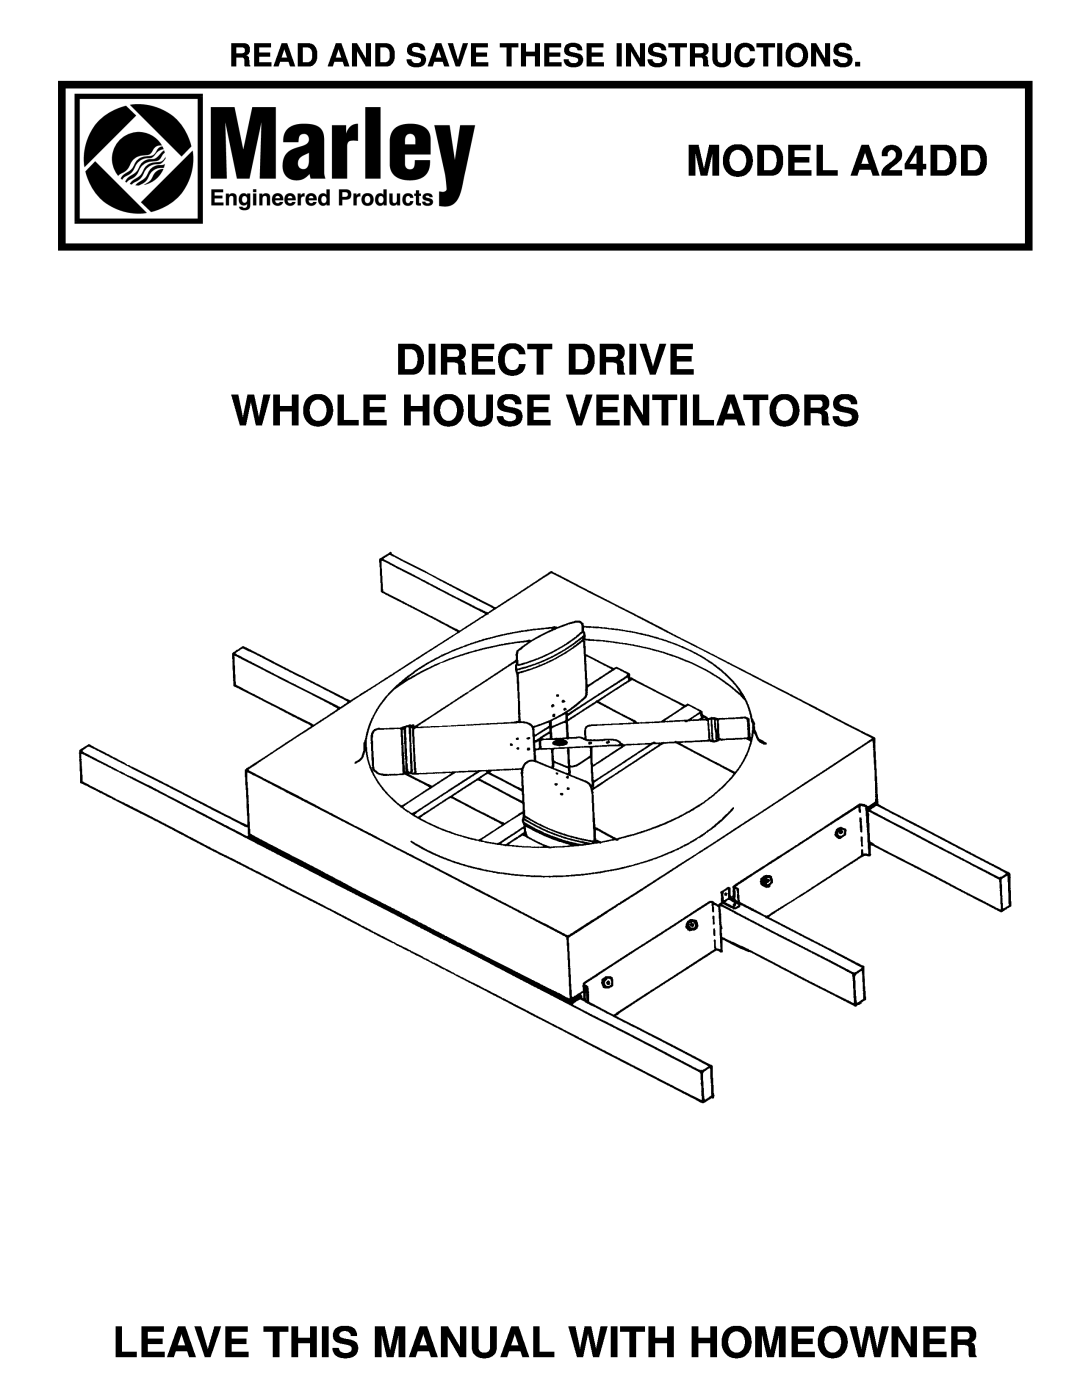 Marley Engineered Products manual Read And Save These Instructions, MODEL A24DD DIRECT DRIVE WHOLE HOUSE VENTILATORS 